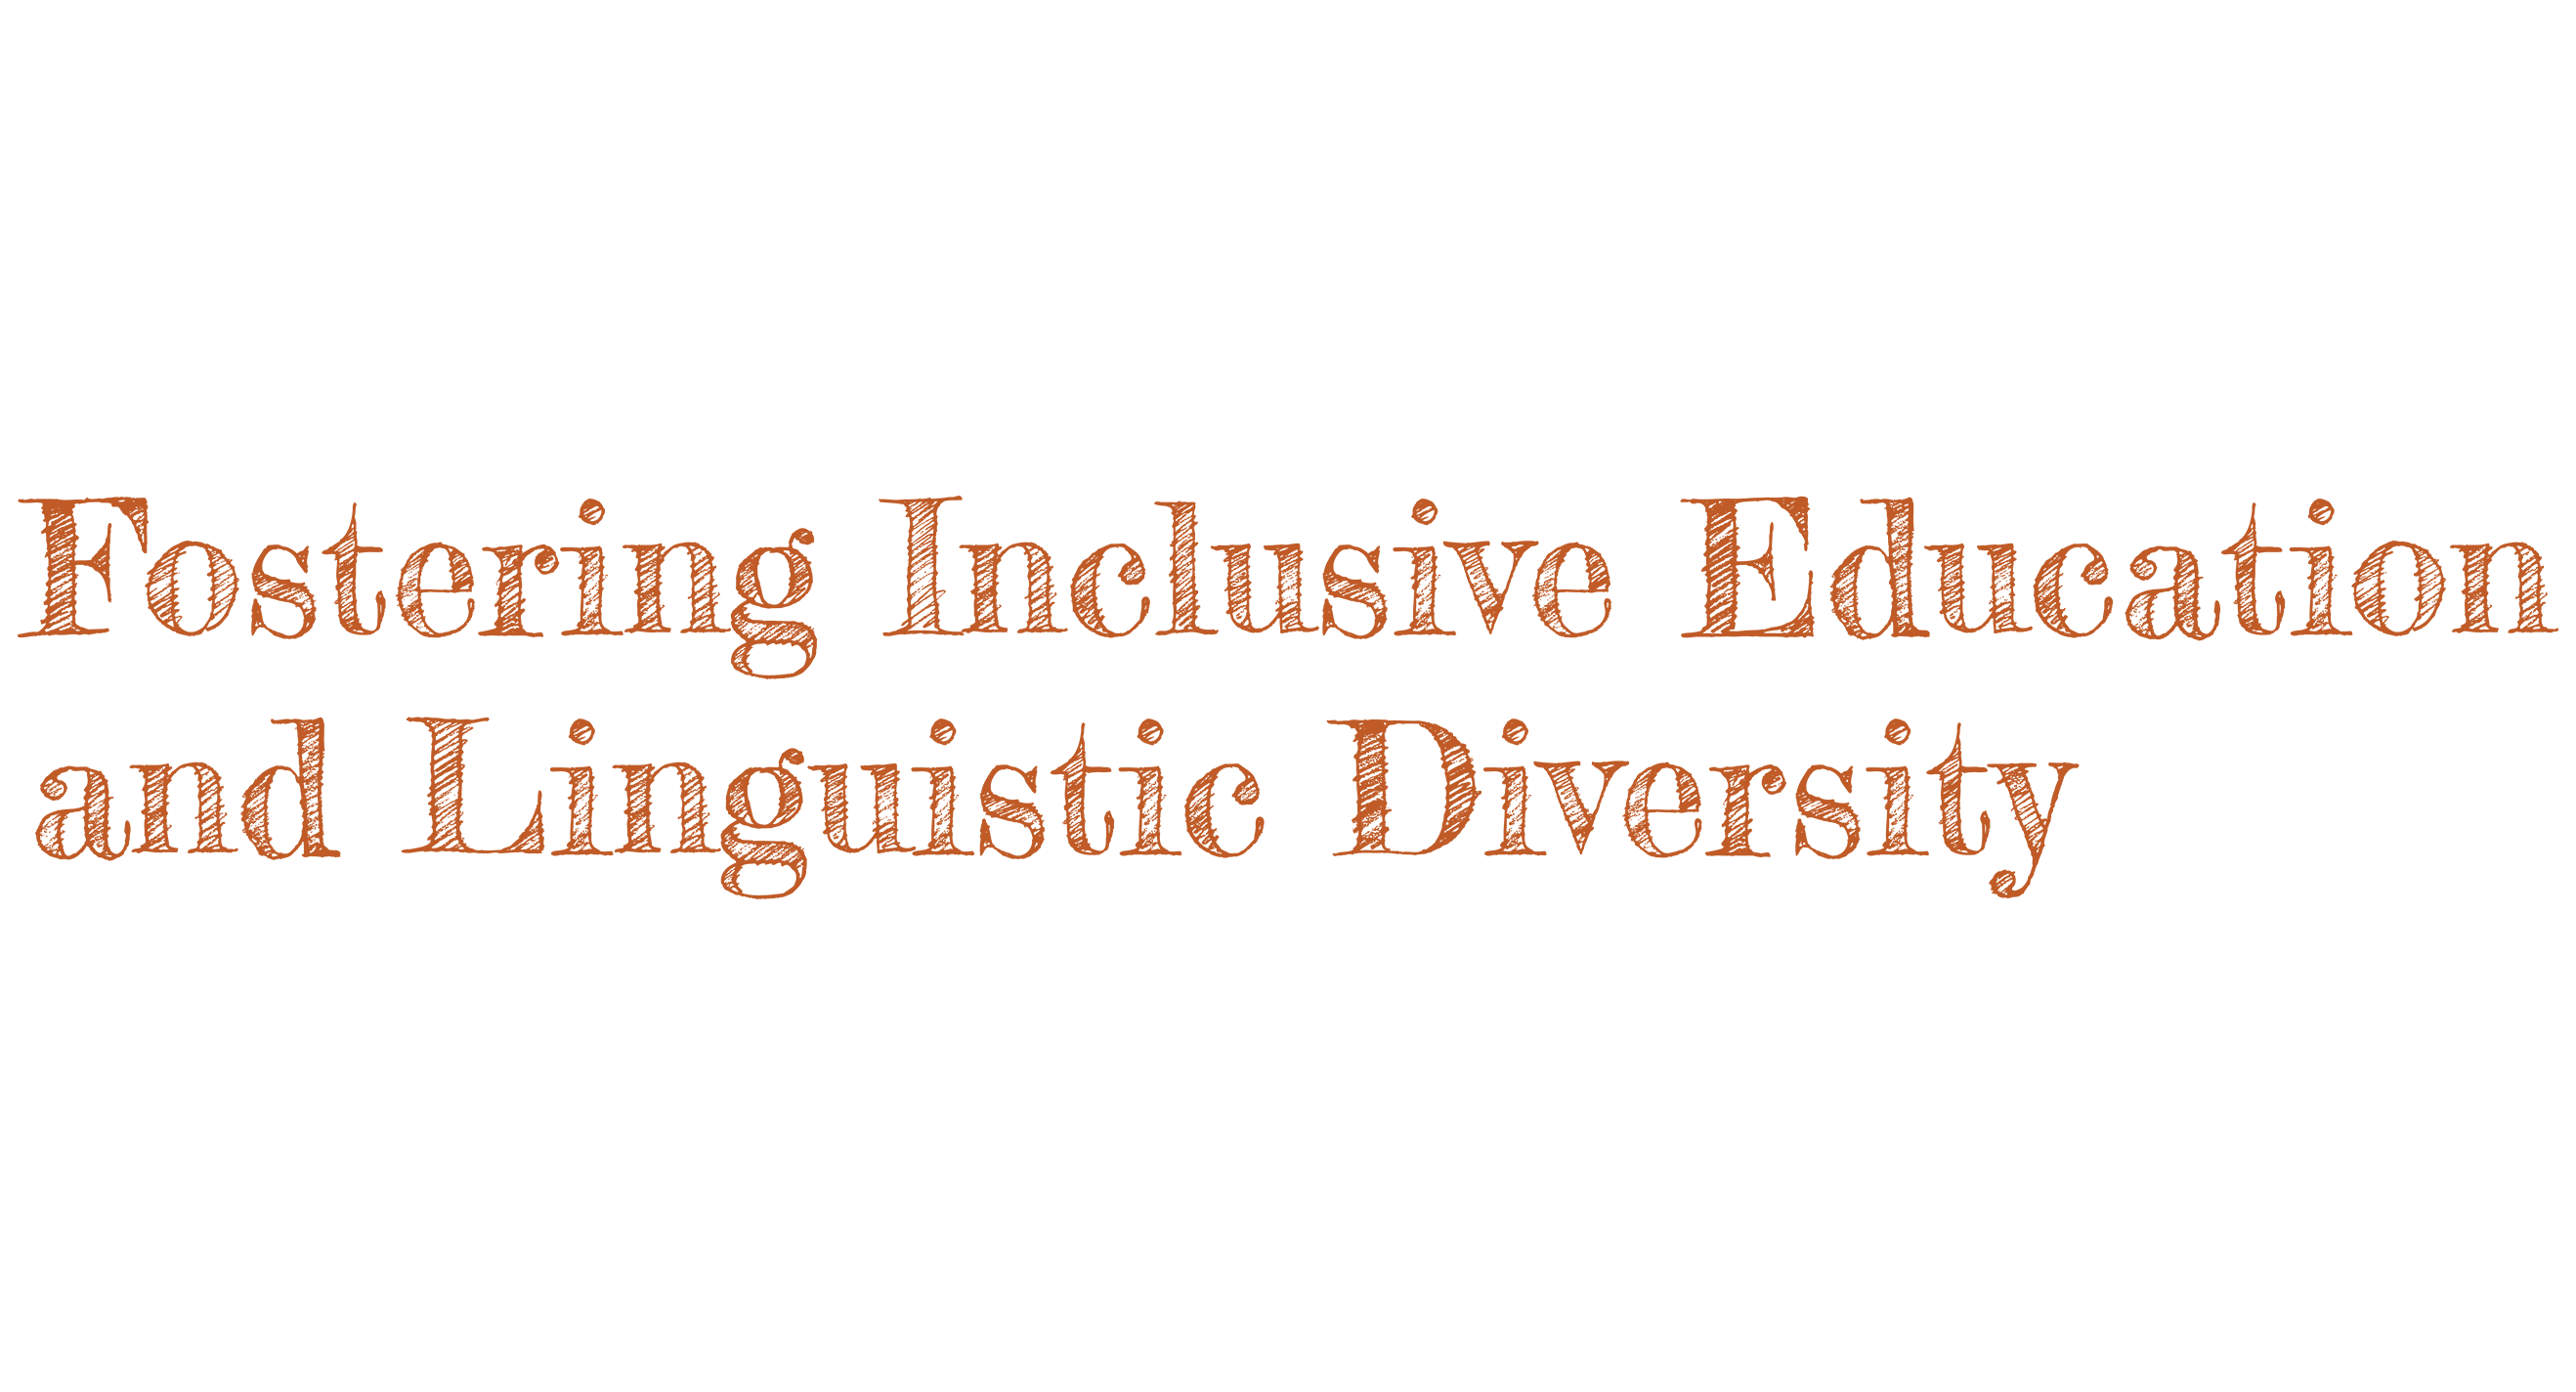 Large letters penciled in orange reading Fostering Inclusive Education and Linguistic Diversity